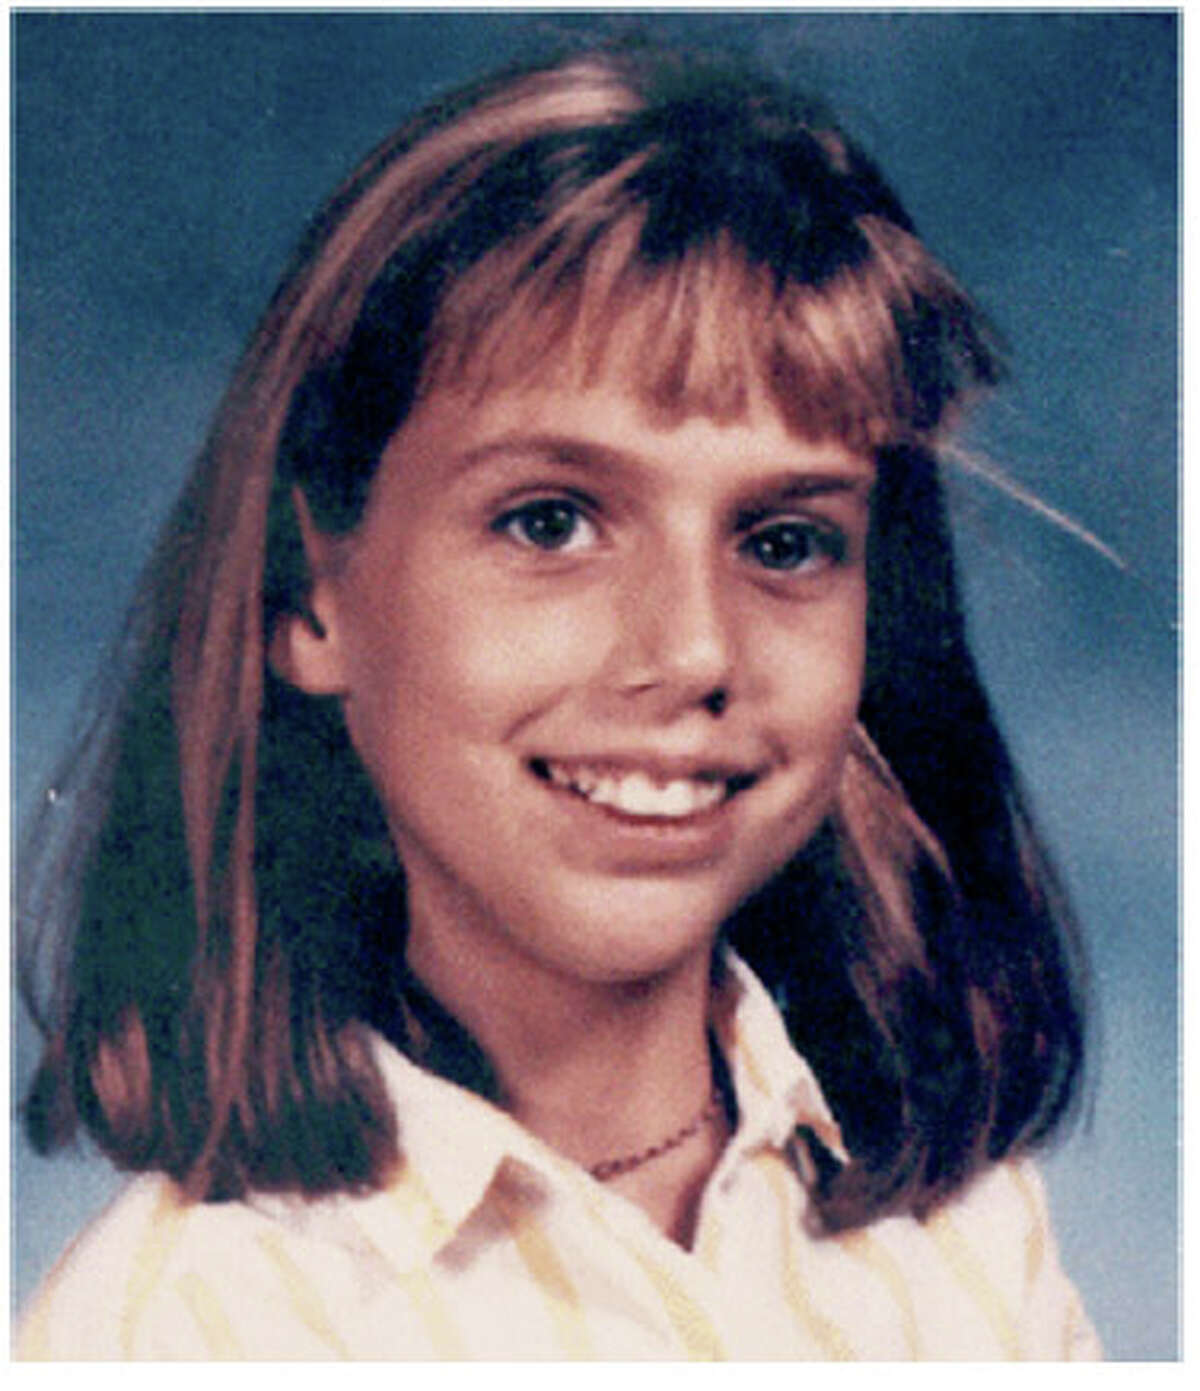 Heidi Seeman  Case 90/400893 Heidi Seeman was 11 years old when she was abducted while walking home from a friend’s house on the Northeast side on August 4, 1990. Twenty-one days later, the young girl's decomposed remains were discovered in Hays County.